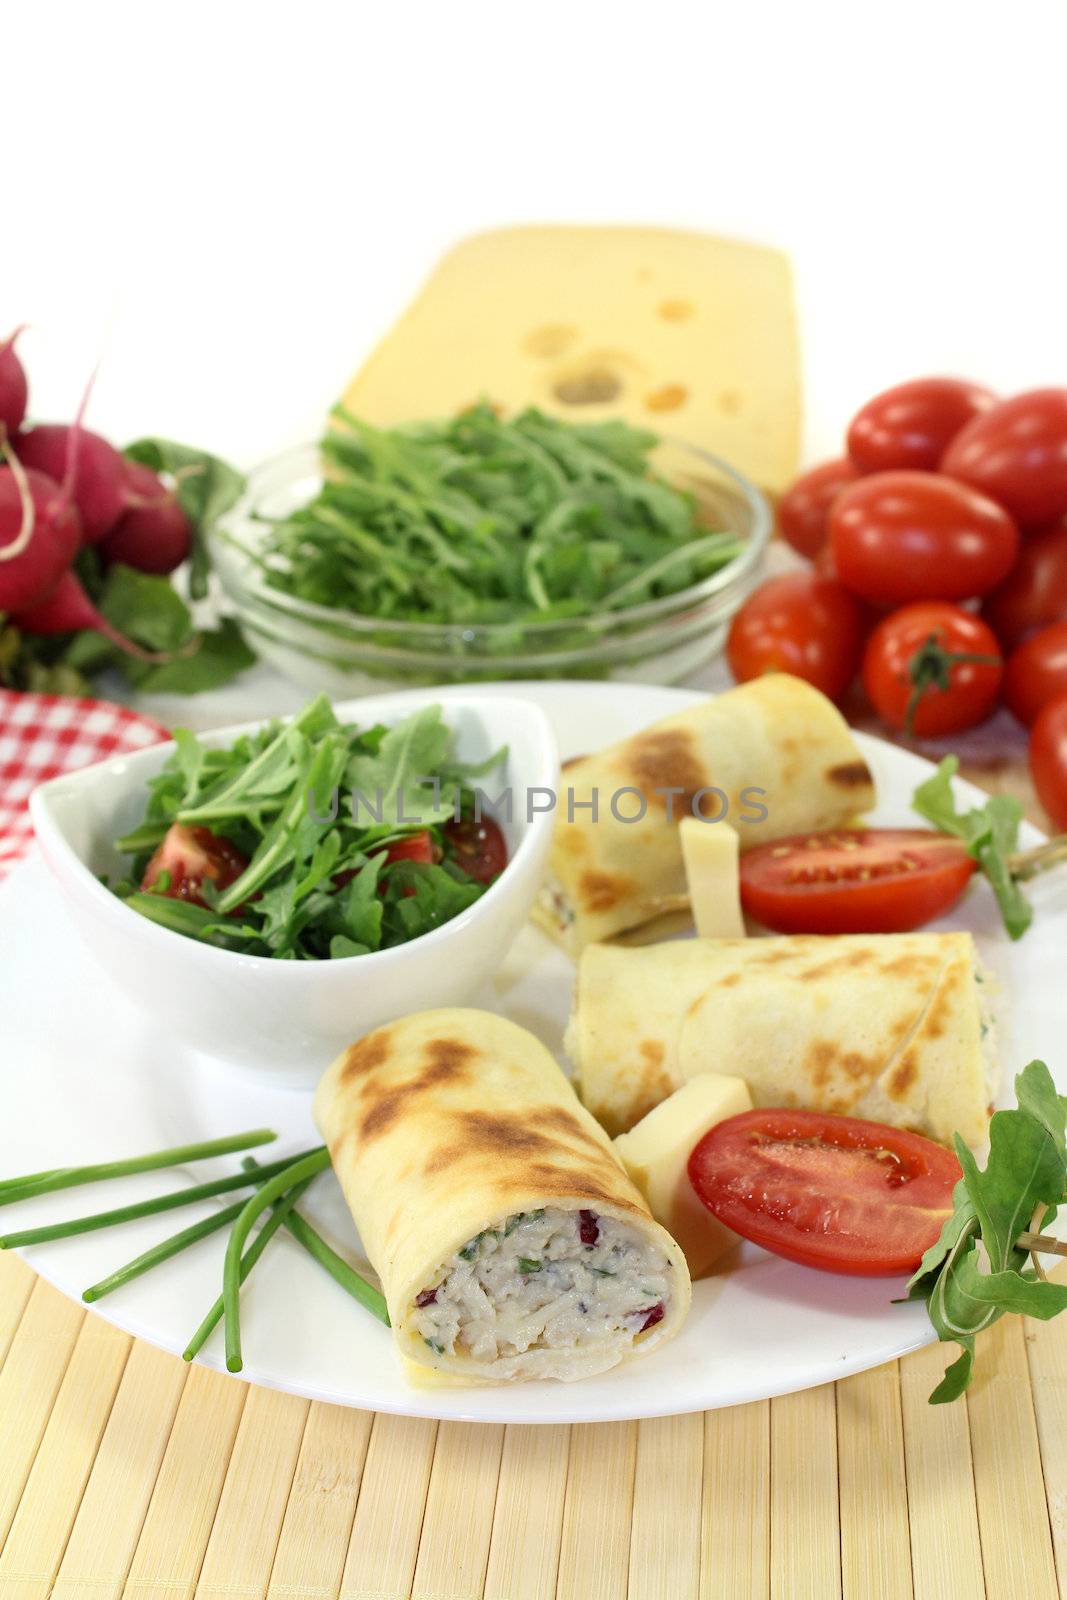 Cheese crepe rolls by silencefoto